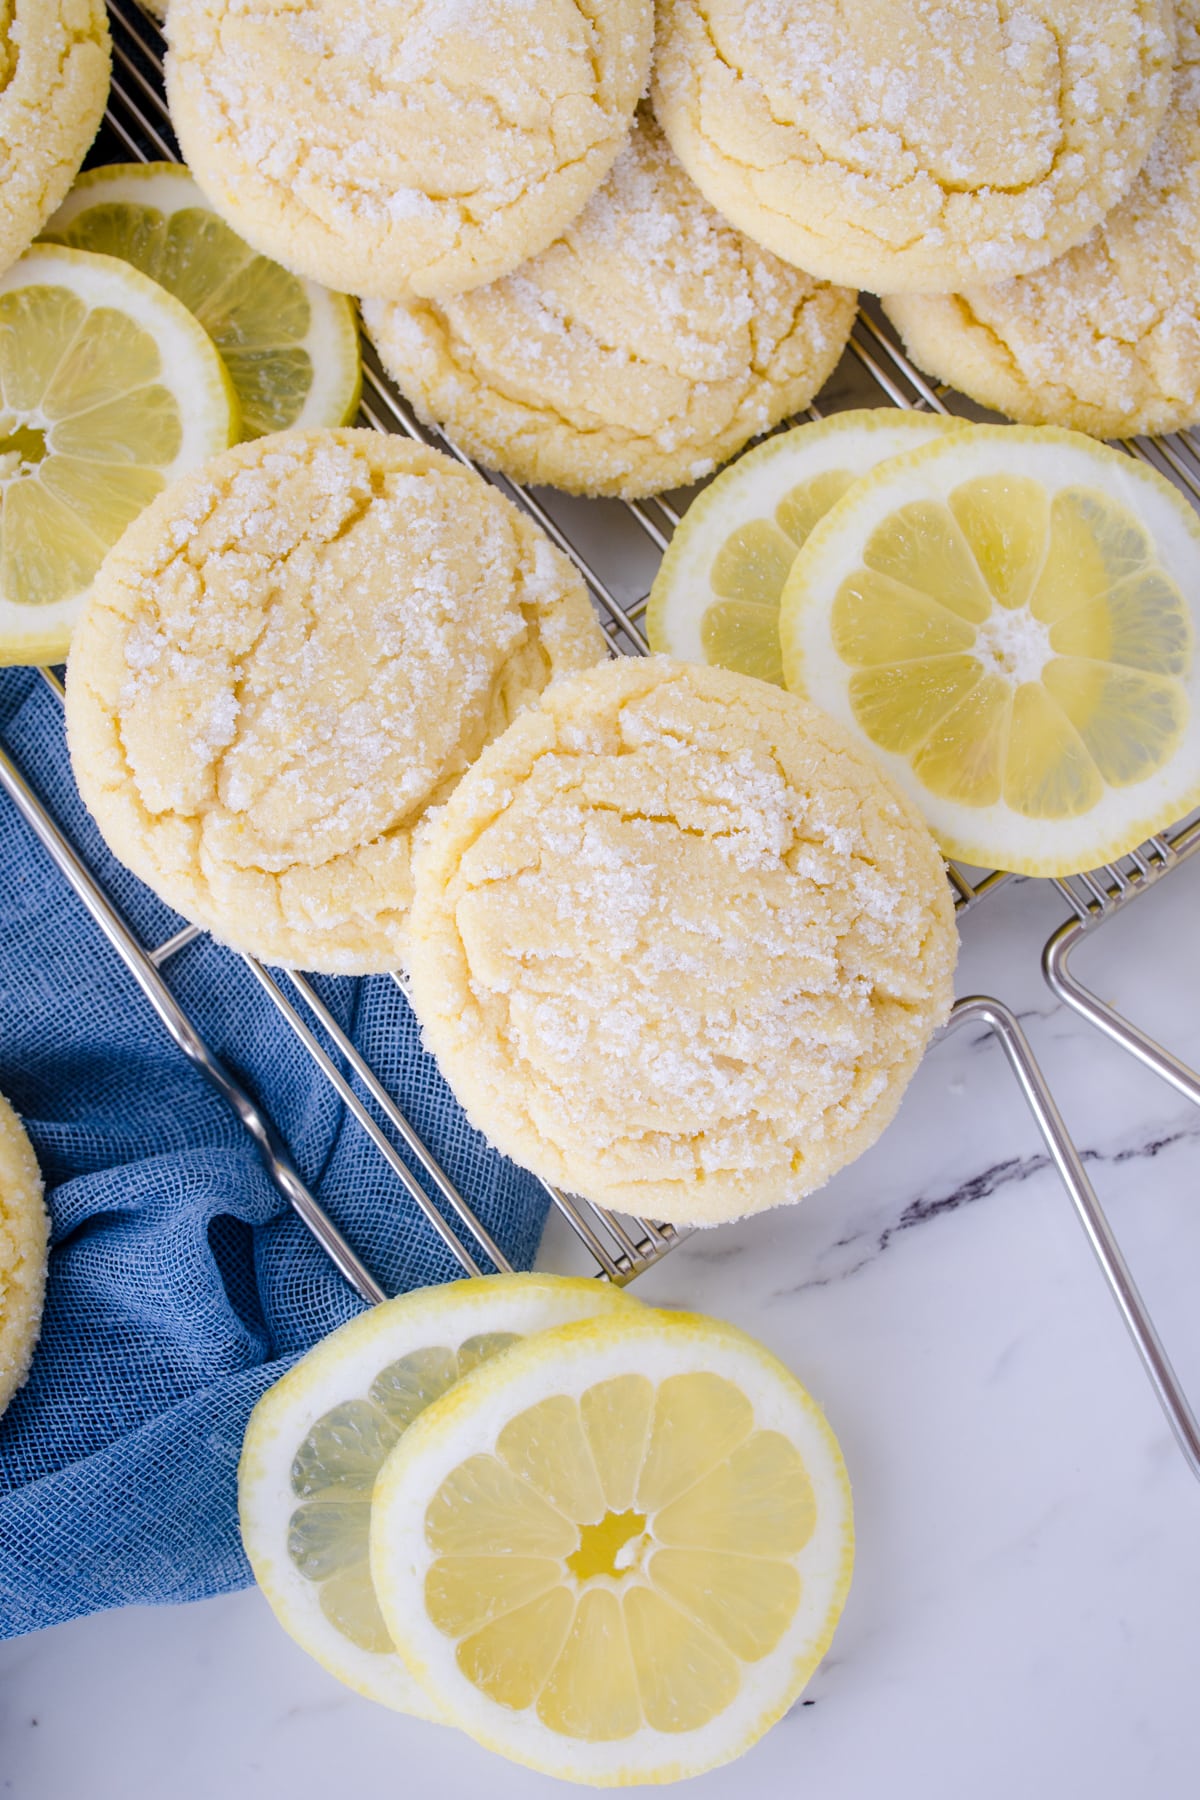 Top view of lemon sugar cookies in a pile mixed with lemon slices.